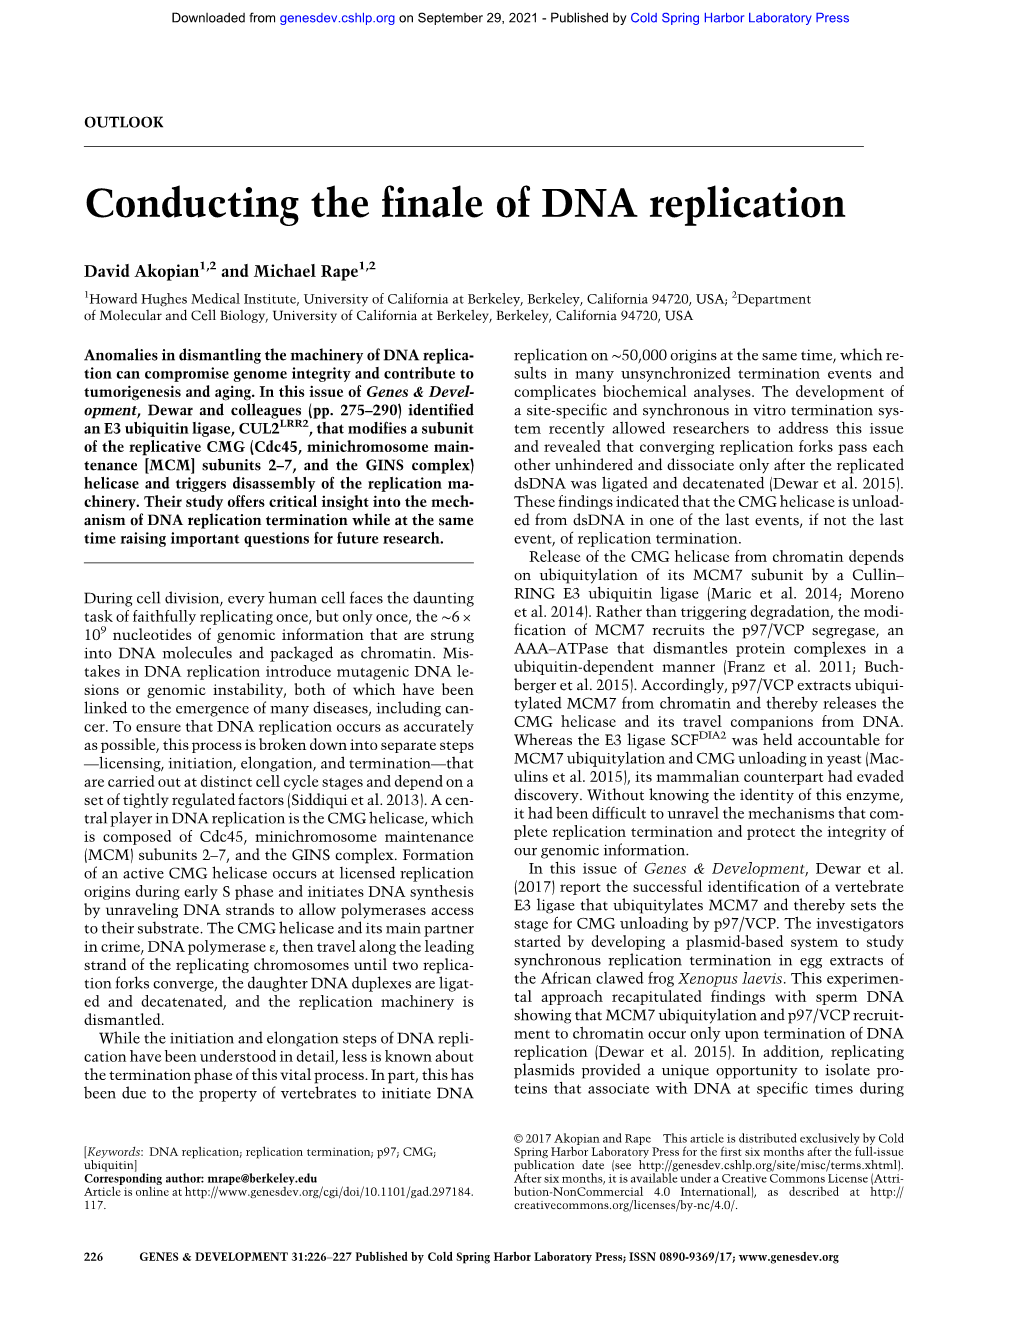 Conducting the Finale of DNA Replication